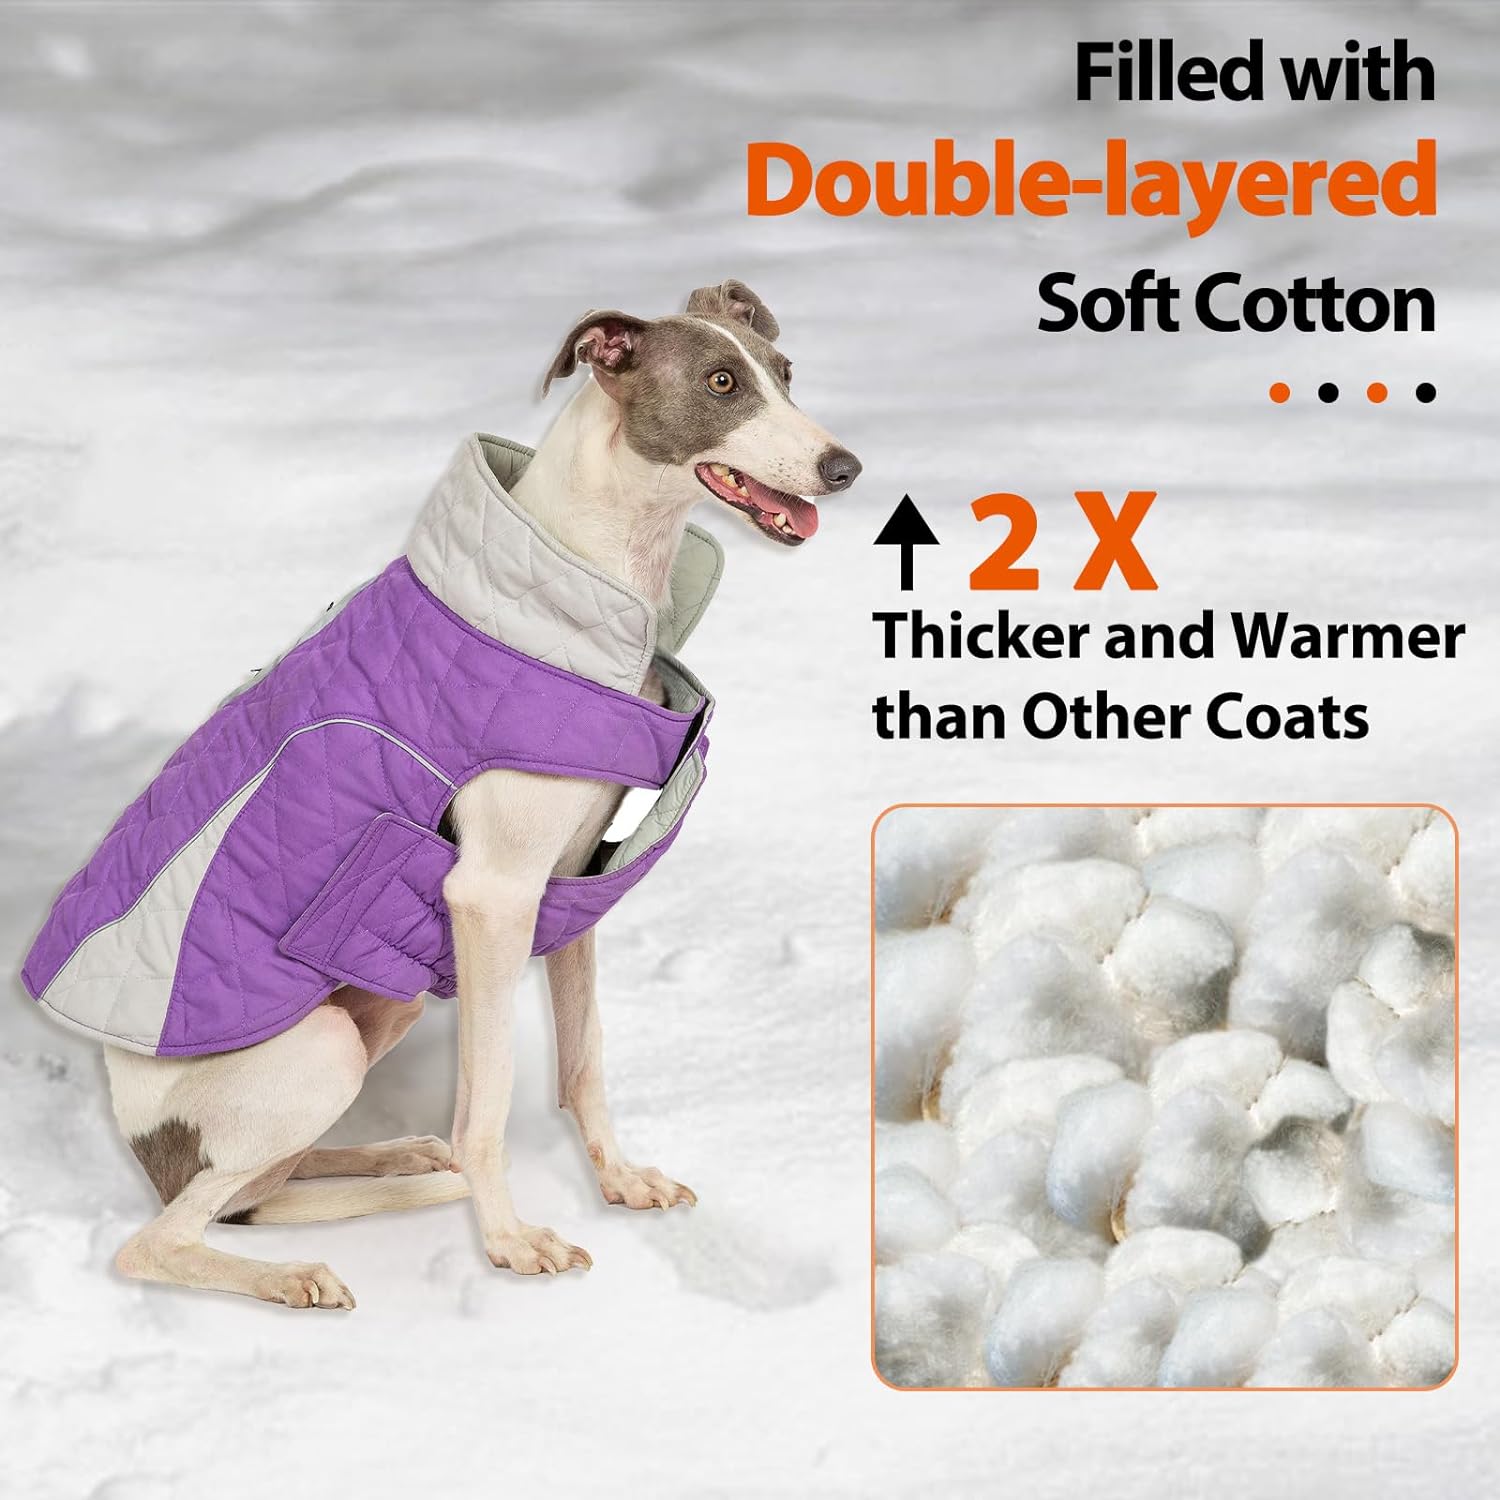 Huntboo-dog-purple-coat-double-layered-soft-cotton-double-thick-warm